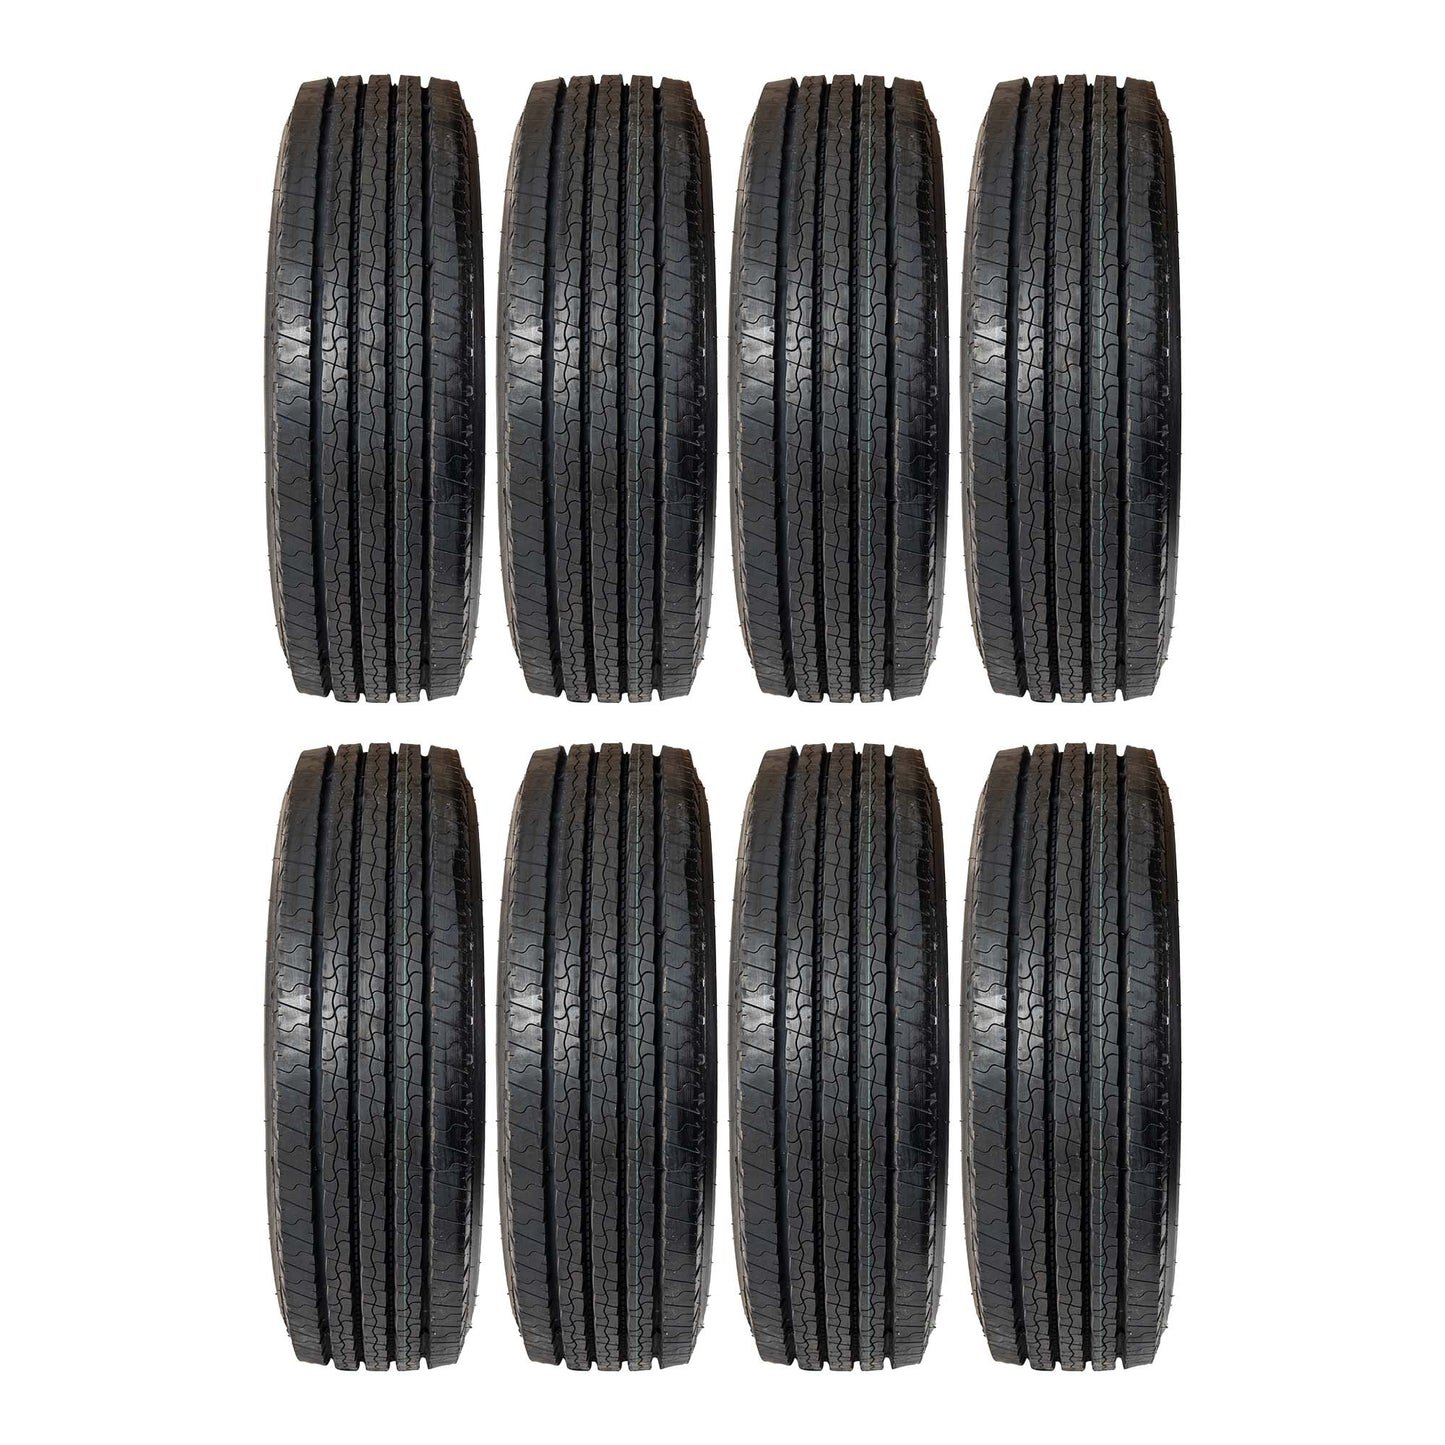 Taskmaster 235/75R17.5 18 Ply Trailer Tire - The Trailer Parts Outlet